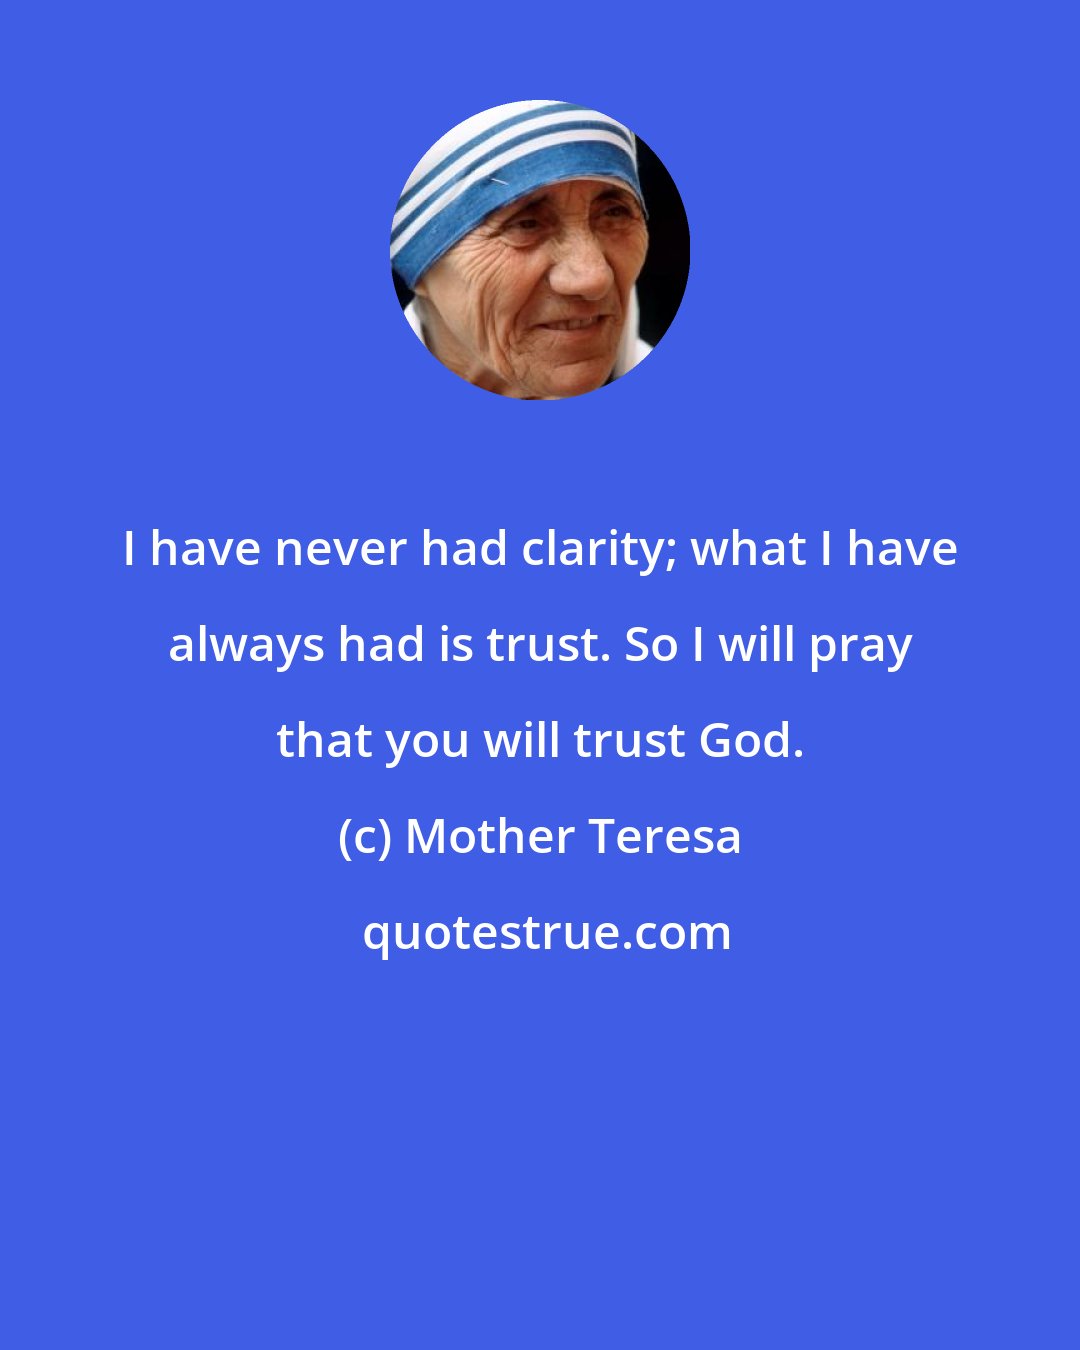 Mother Teresa: I have never had clarity; what I have always had is trust. So I will pray that you will trust God.